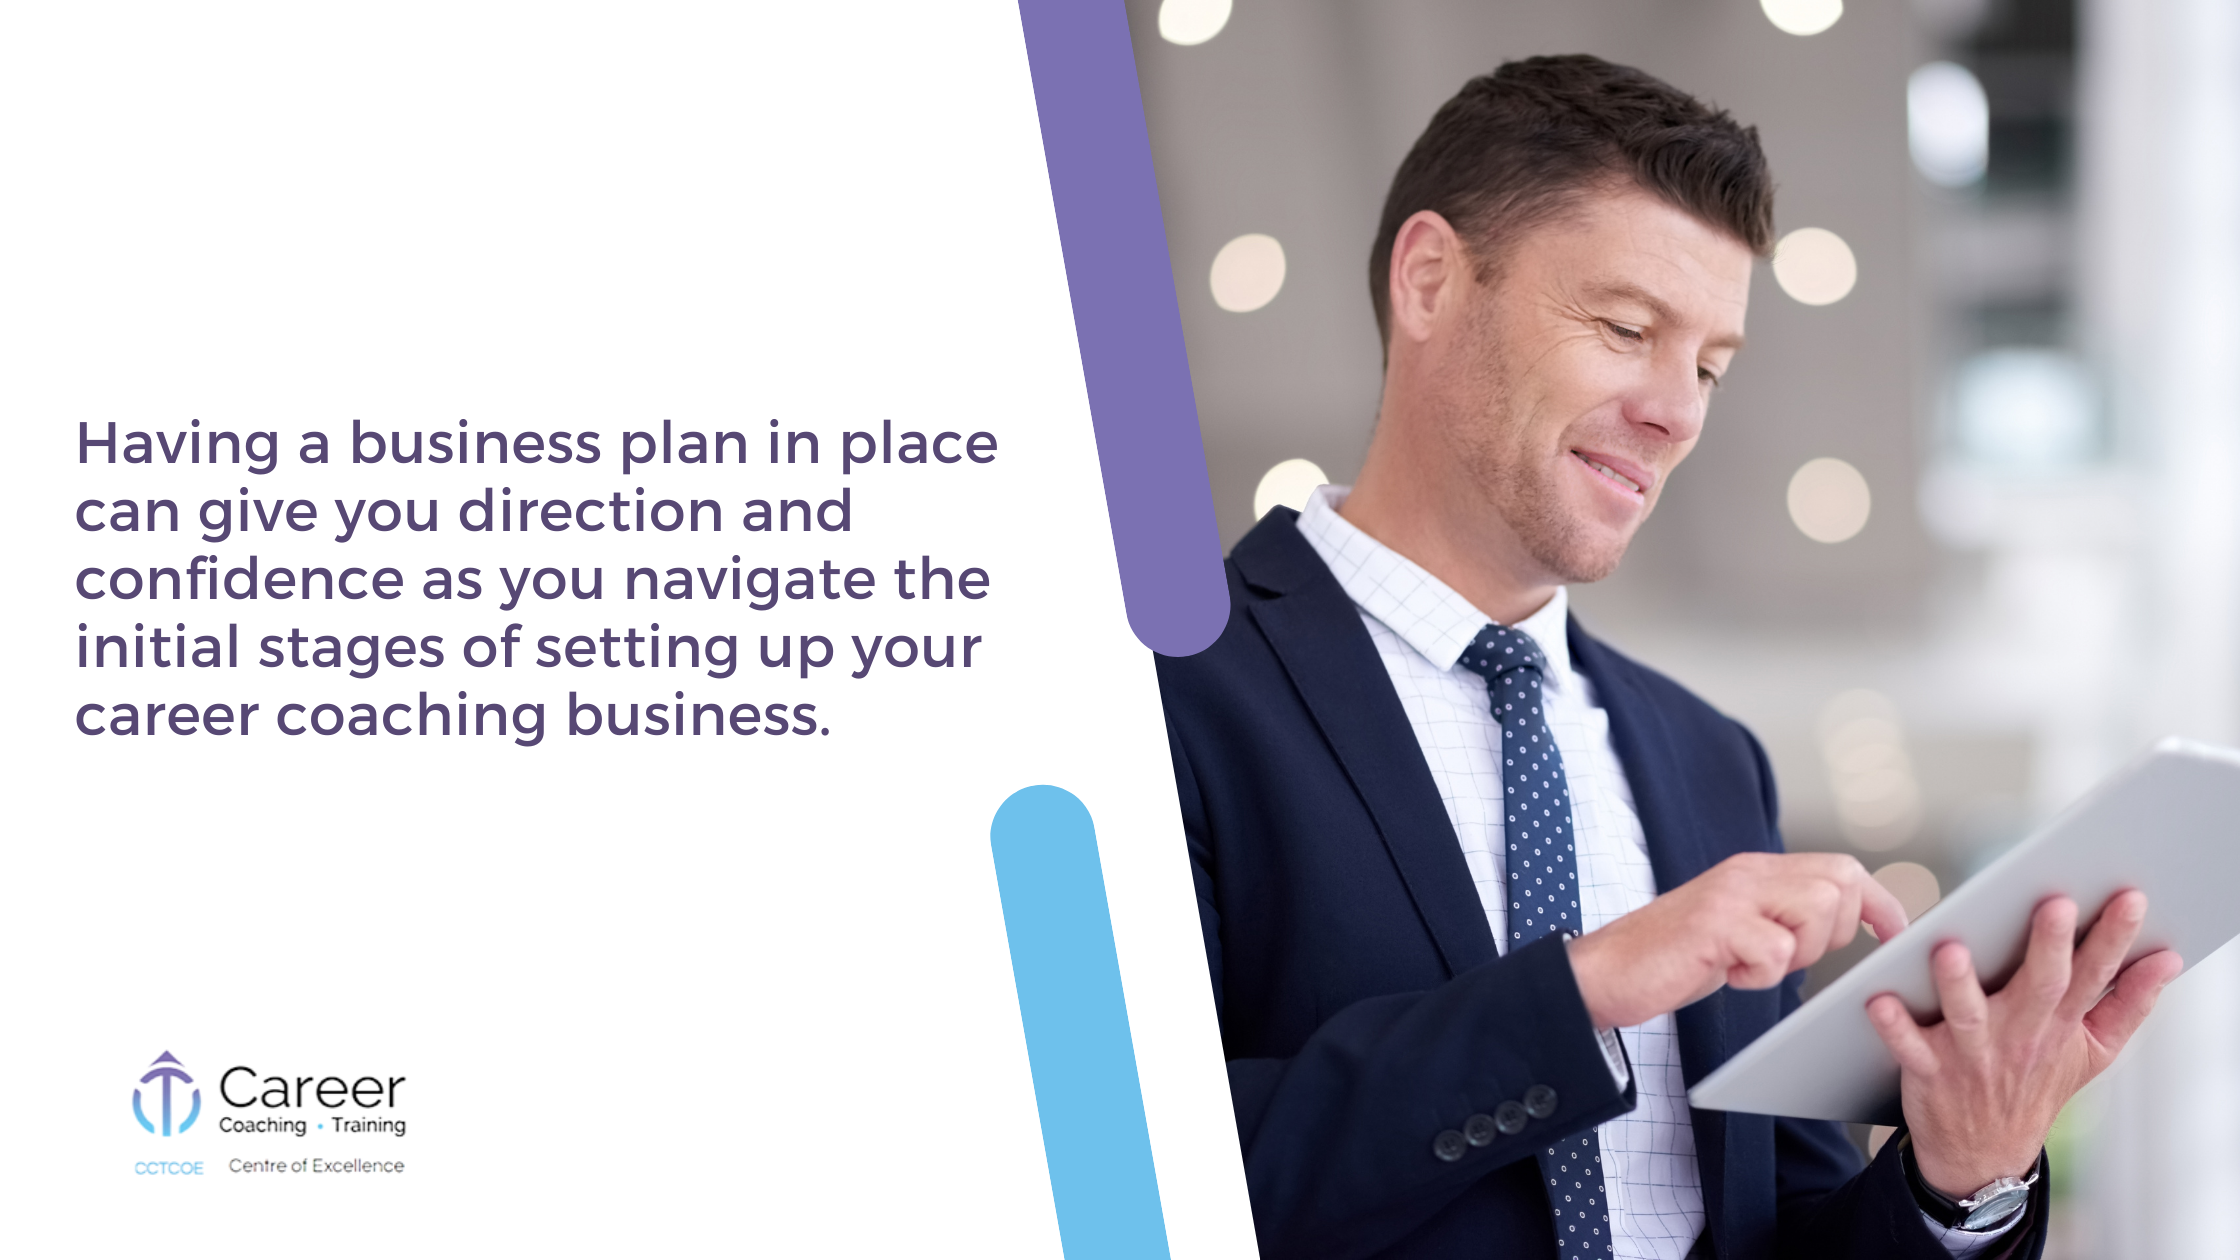 Having a business plan in place can give you direction and confidence as you navigate the initial stages of setting up your career coaching business.